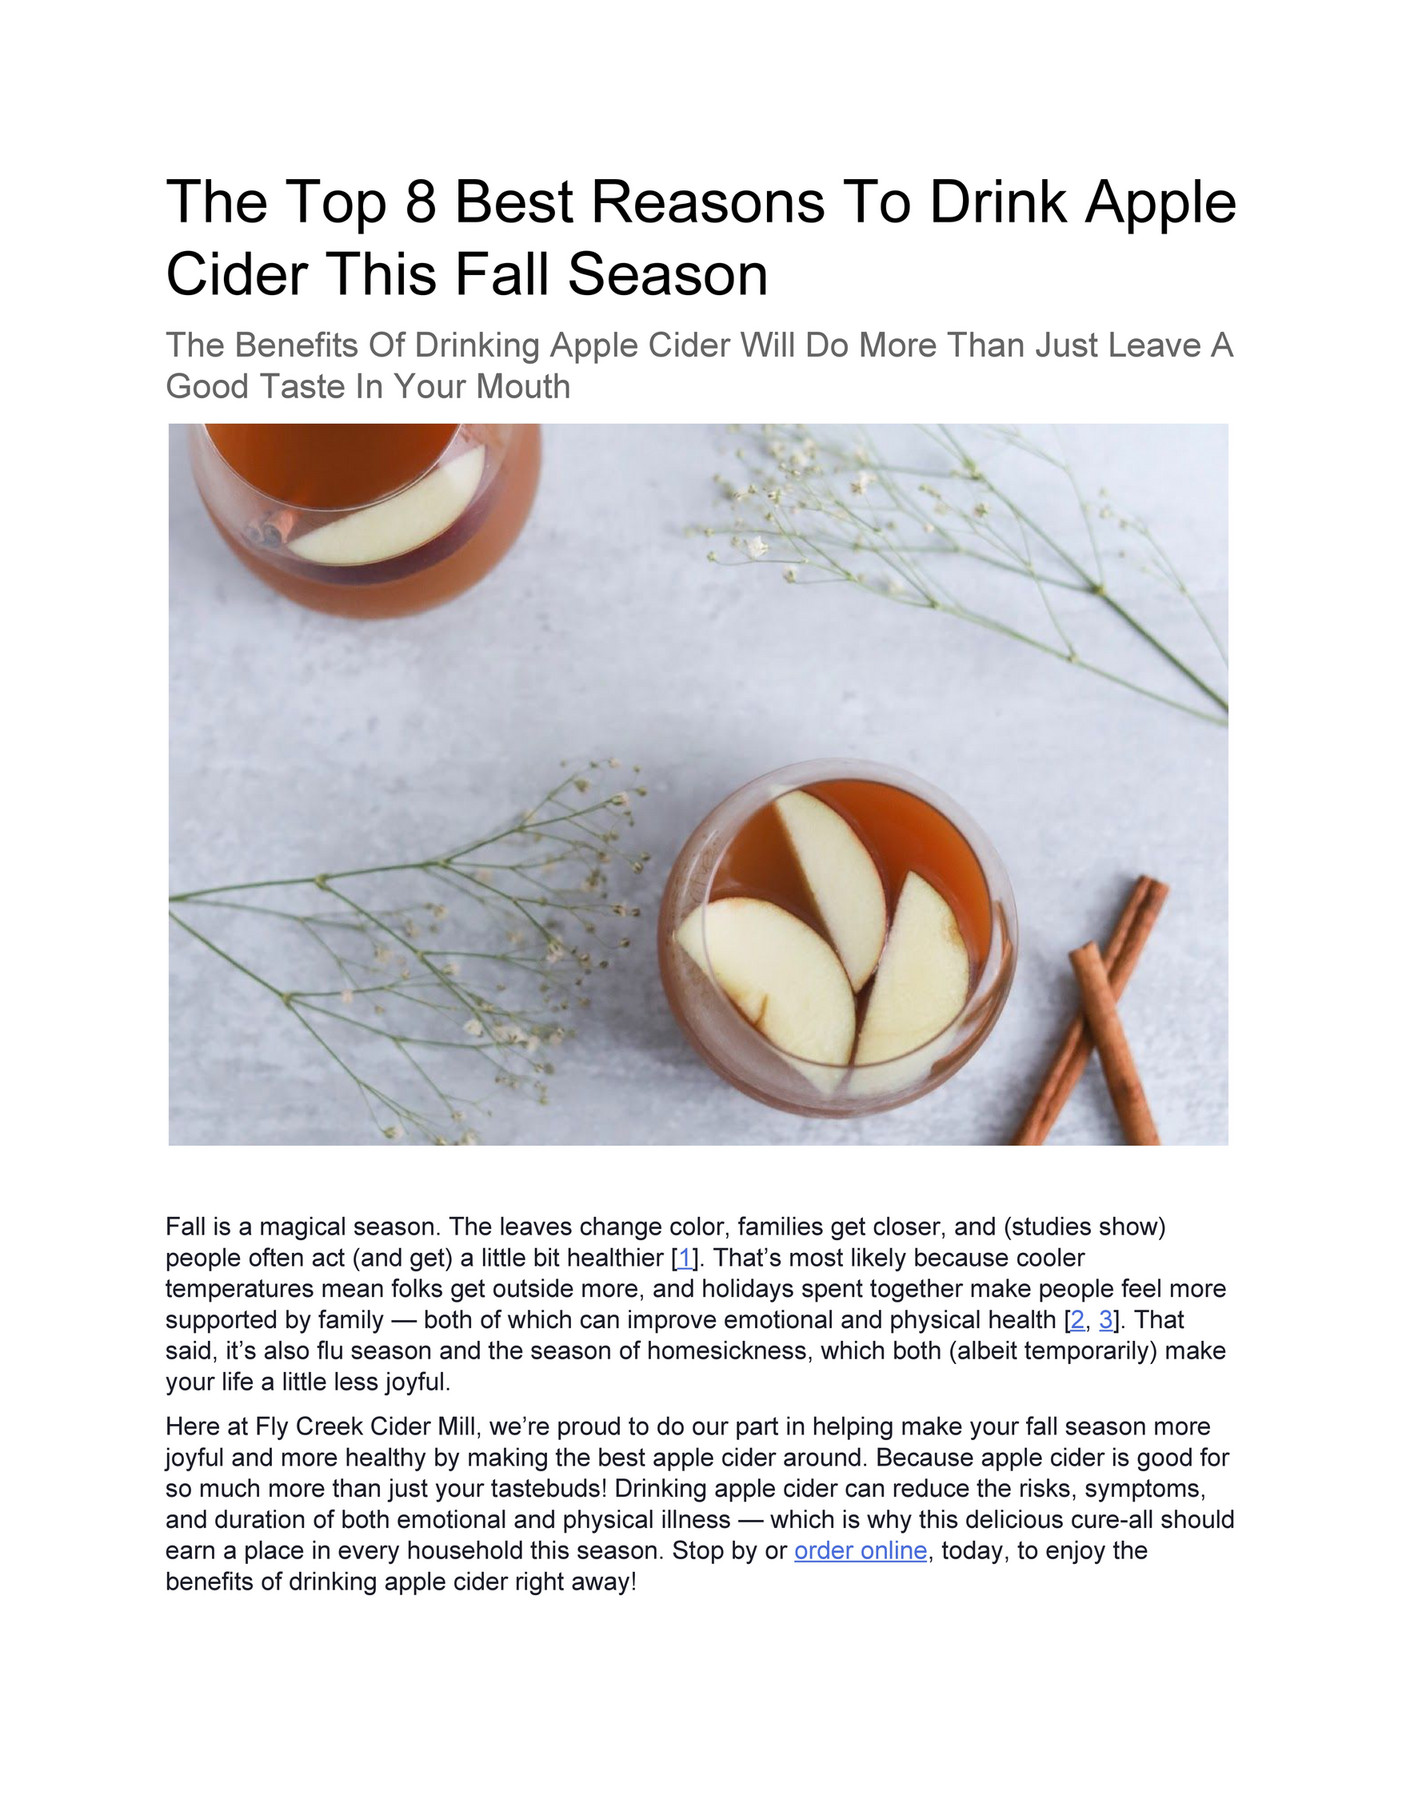 apple cider research paper